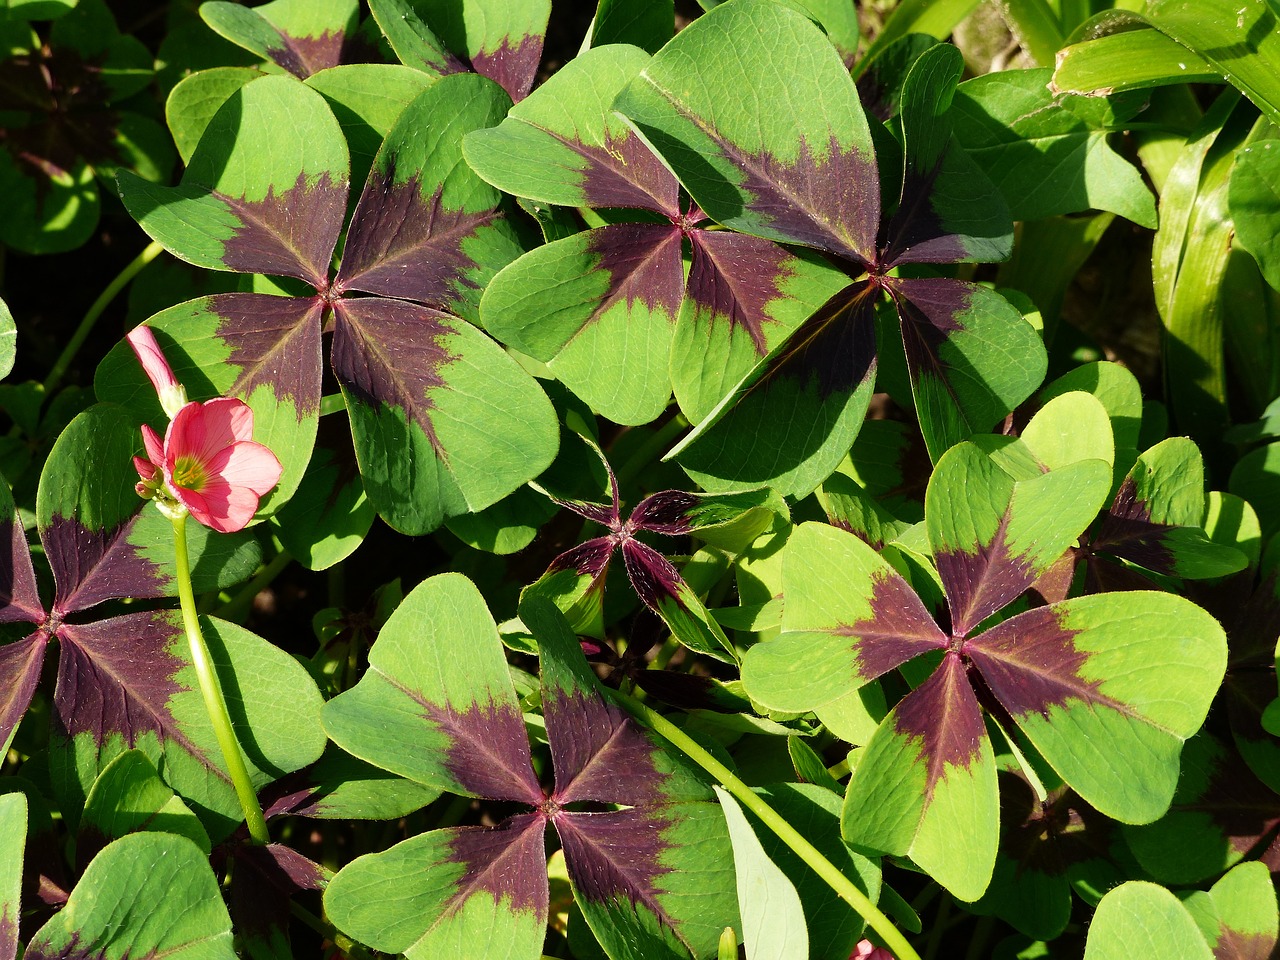 a close up of a green plant with purple leaves, hurufiyya, background full of lucky clovers, shurikens, irish, reddish